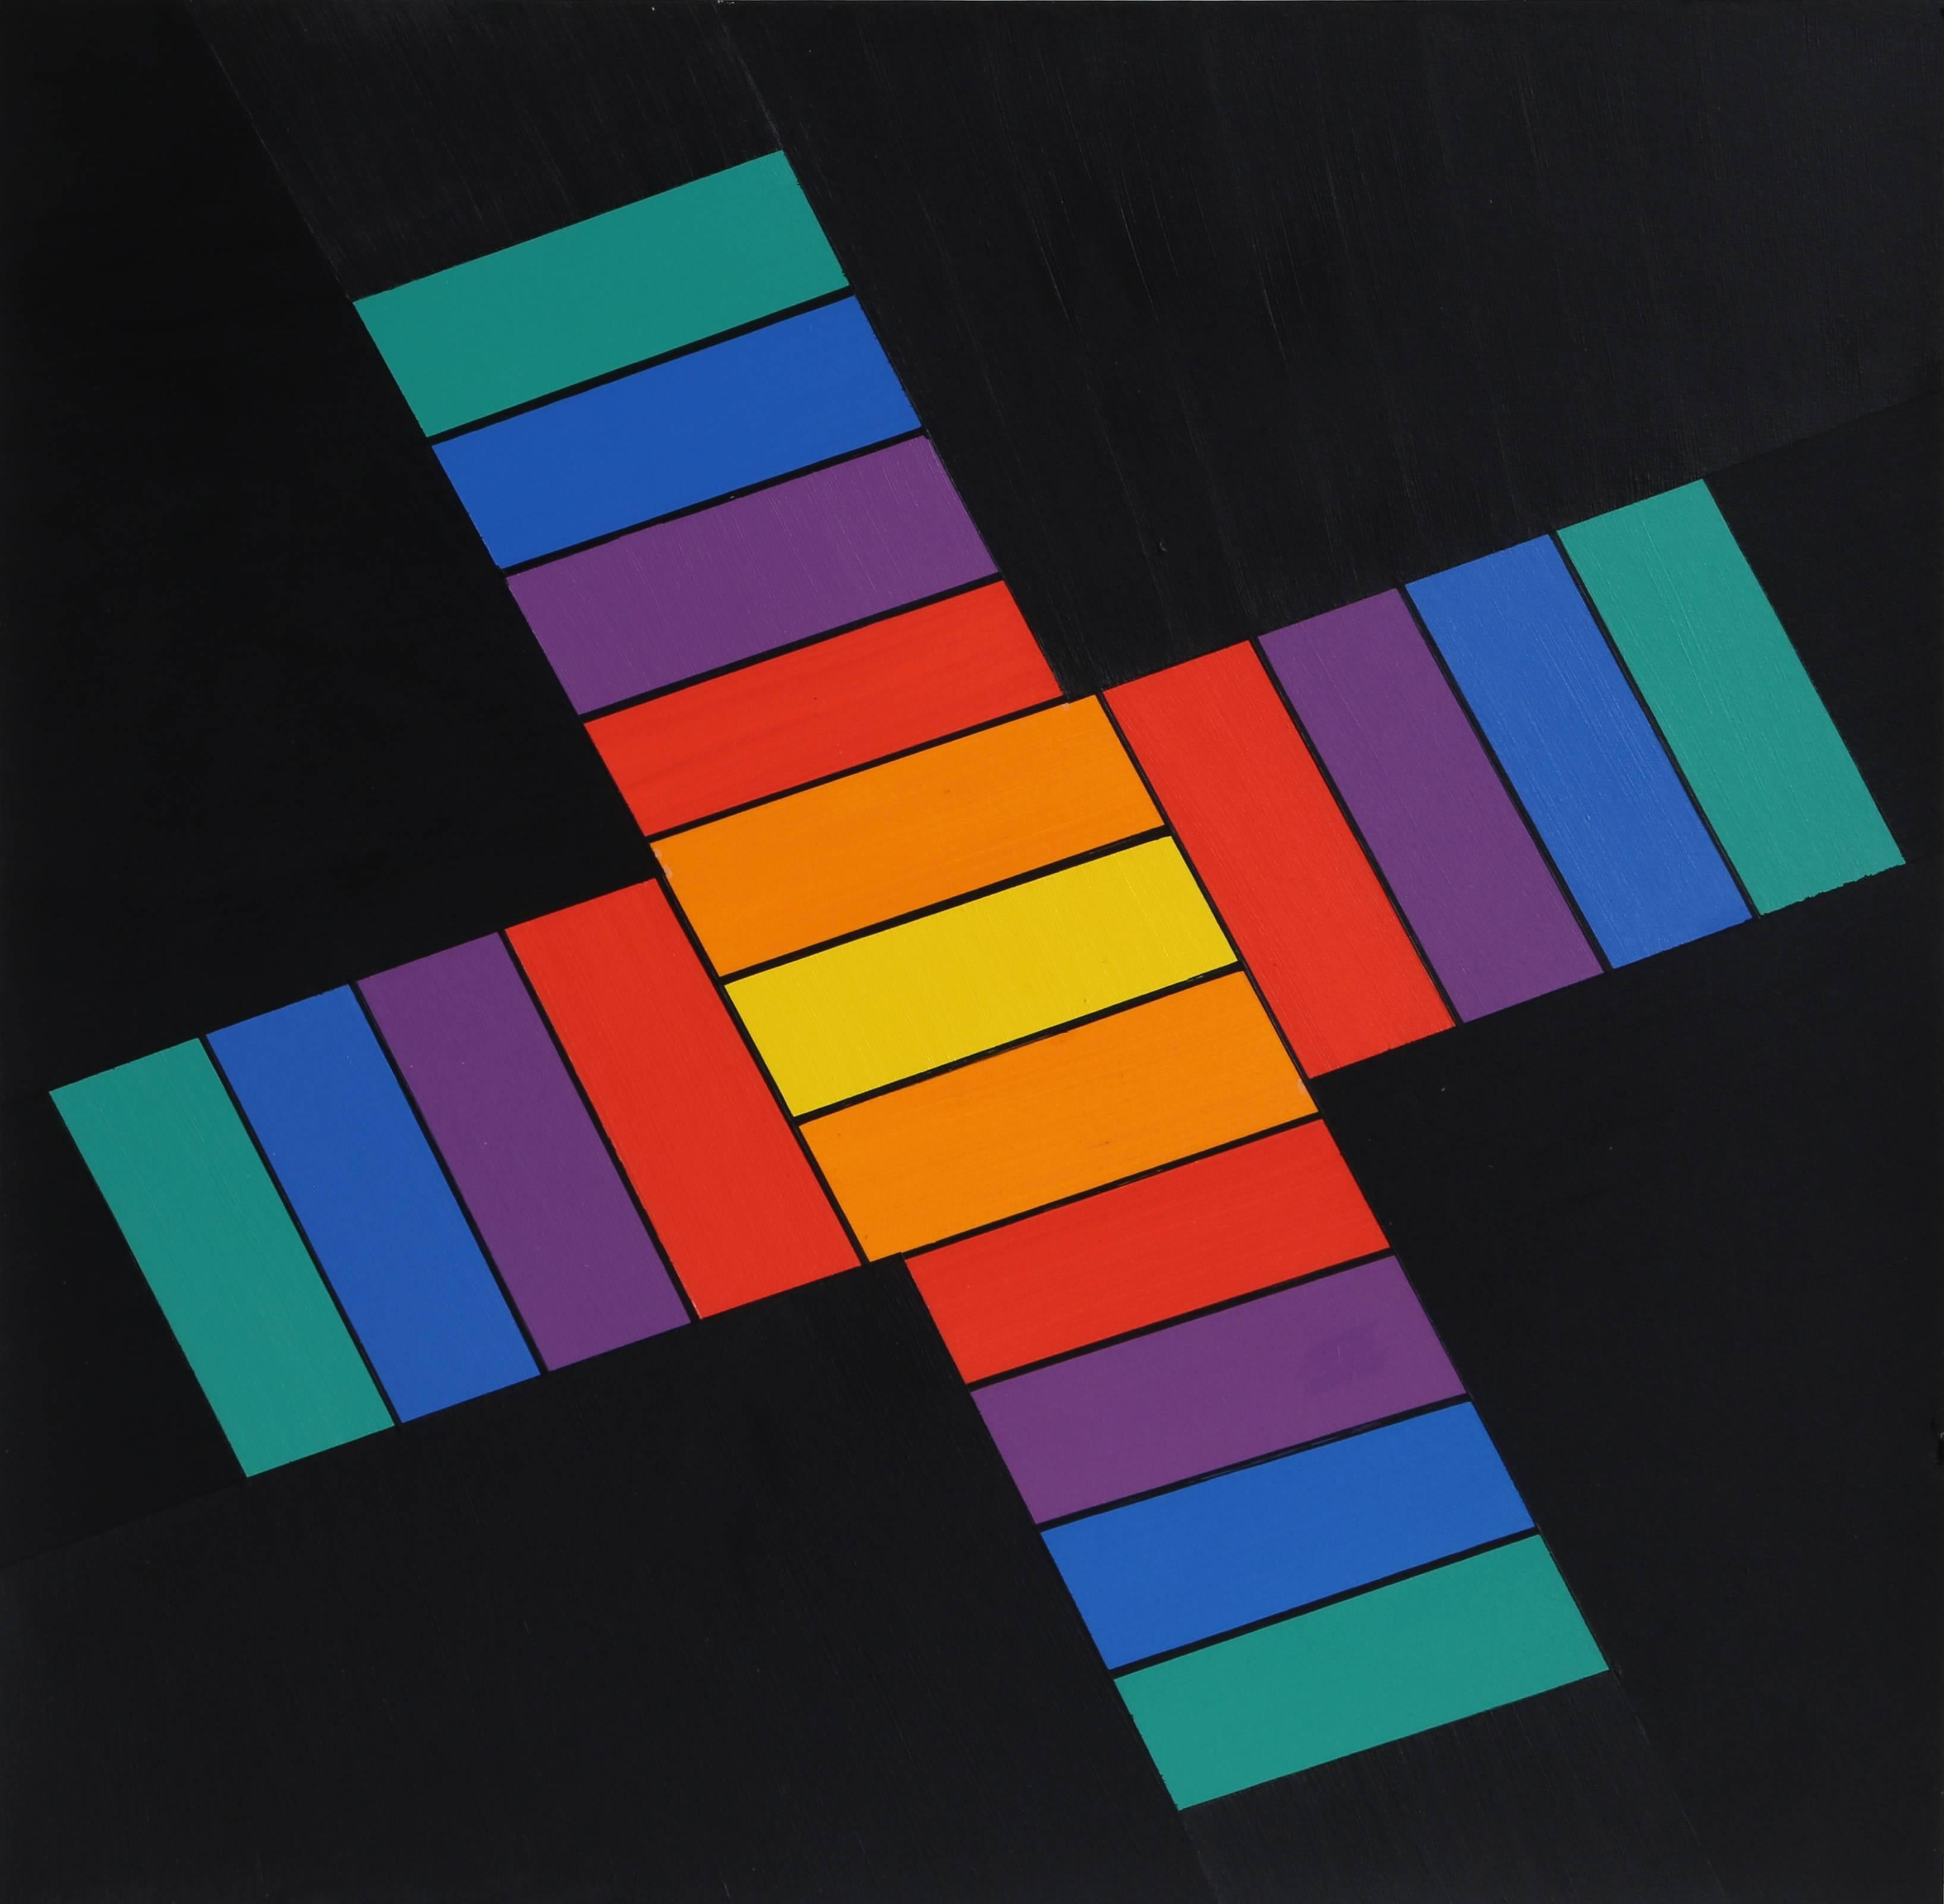 Geometric Abstract Painting, 1969-70